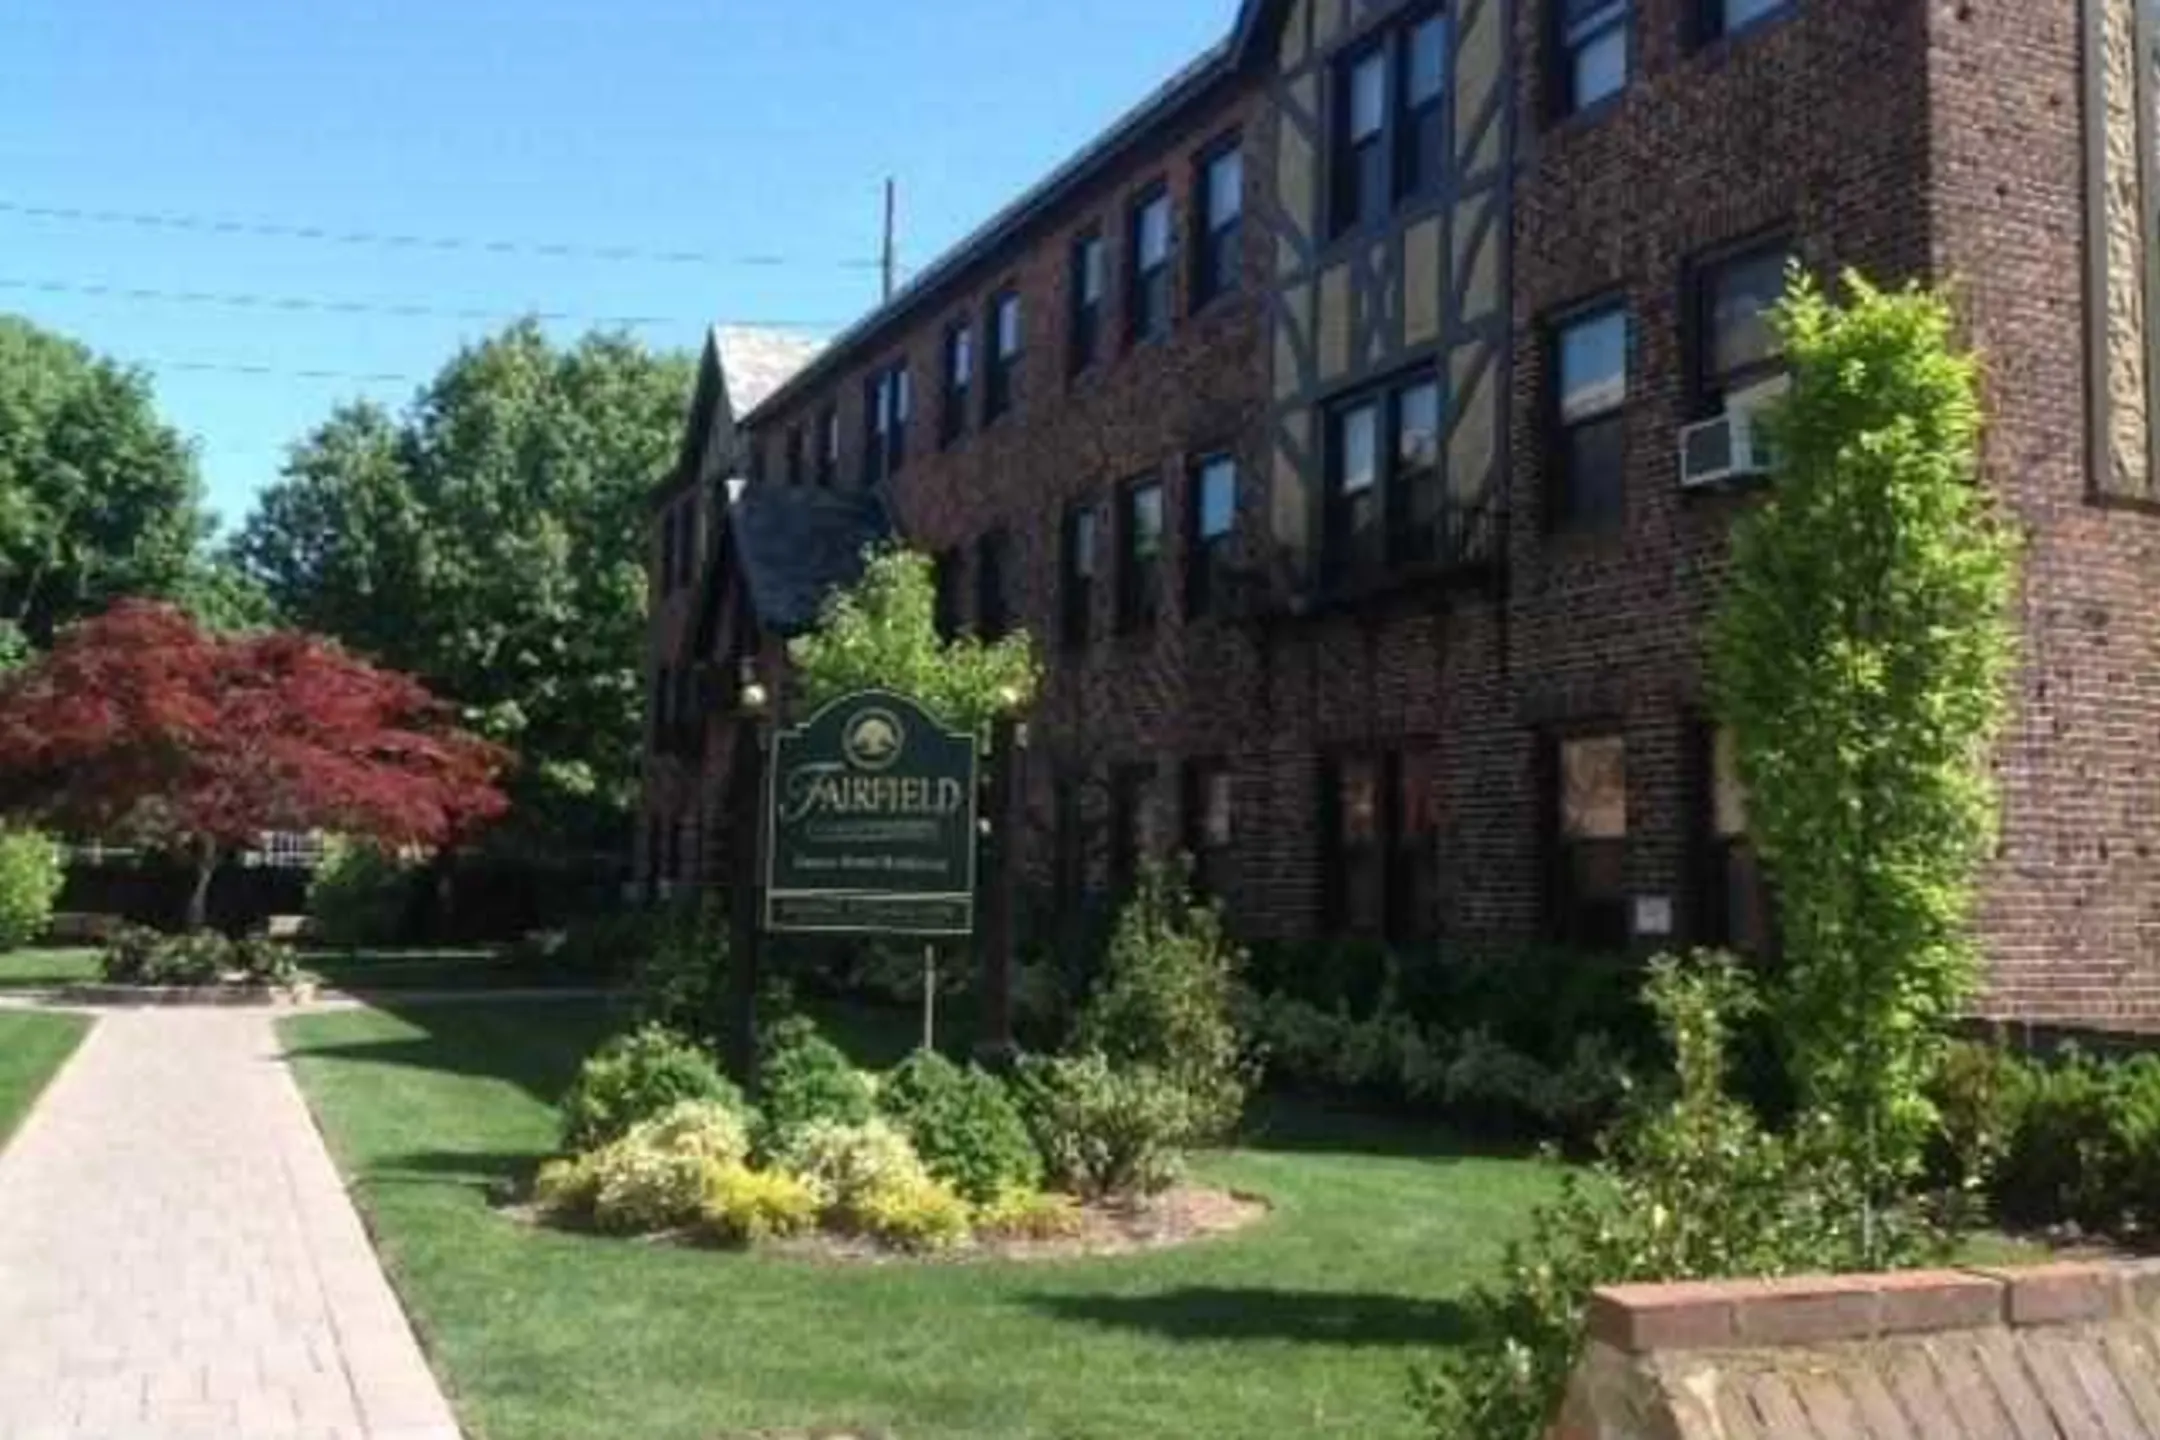 Building - Fairfield Courtyard at Woodmere - Woodmere, NY